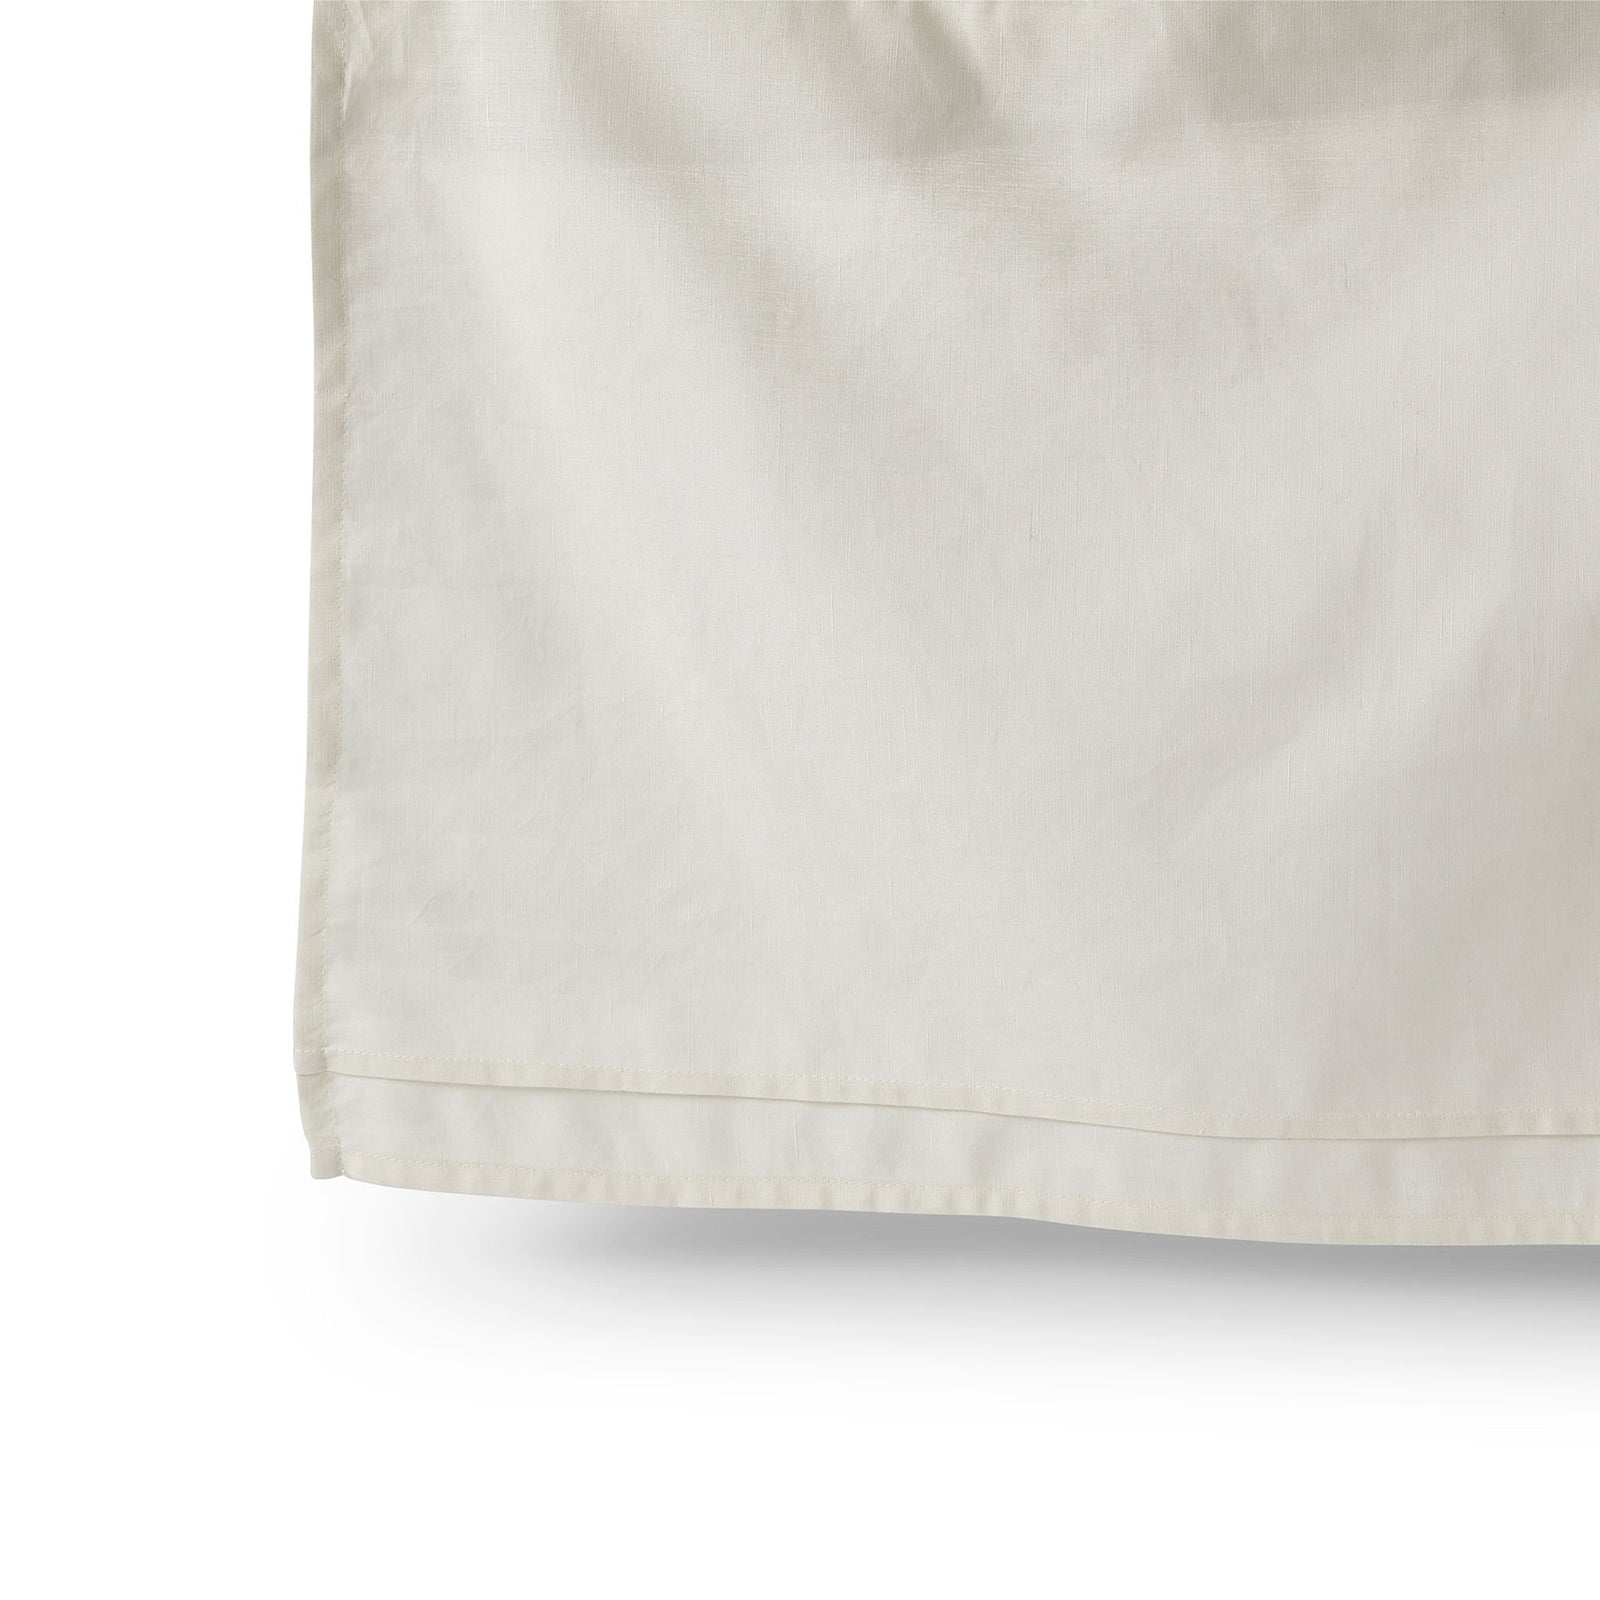 Pehr White Cotton Linen Crib Skirt. GOTS Certified Organic Cotton. Ethically Made.